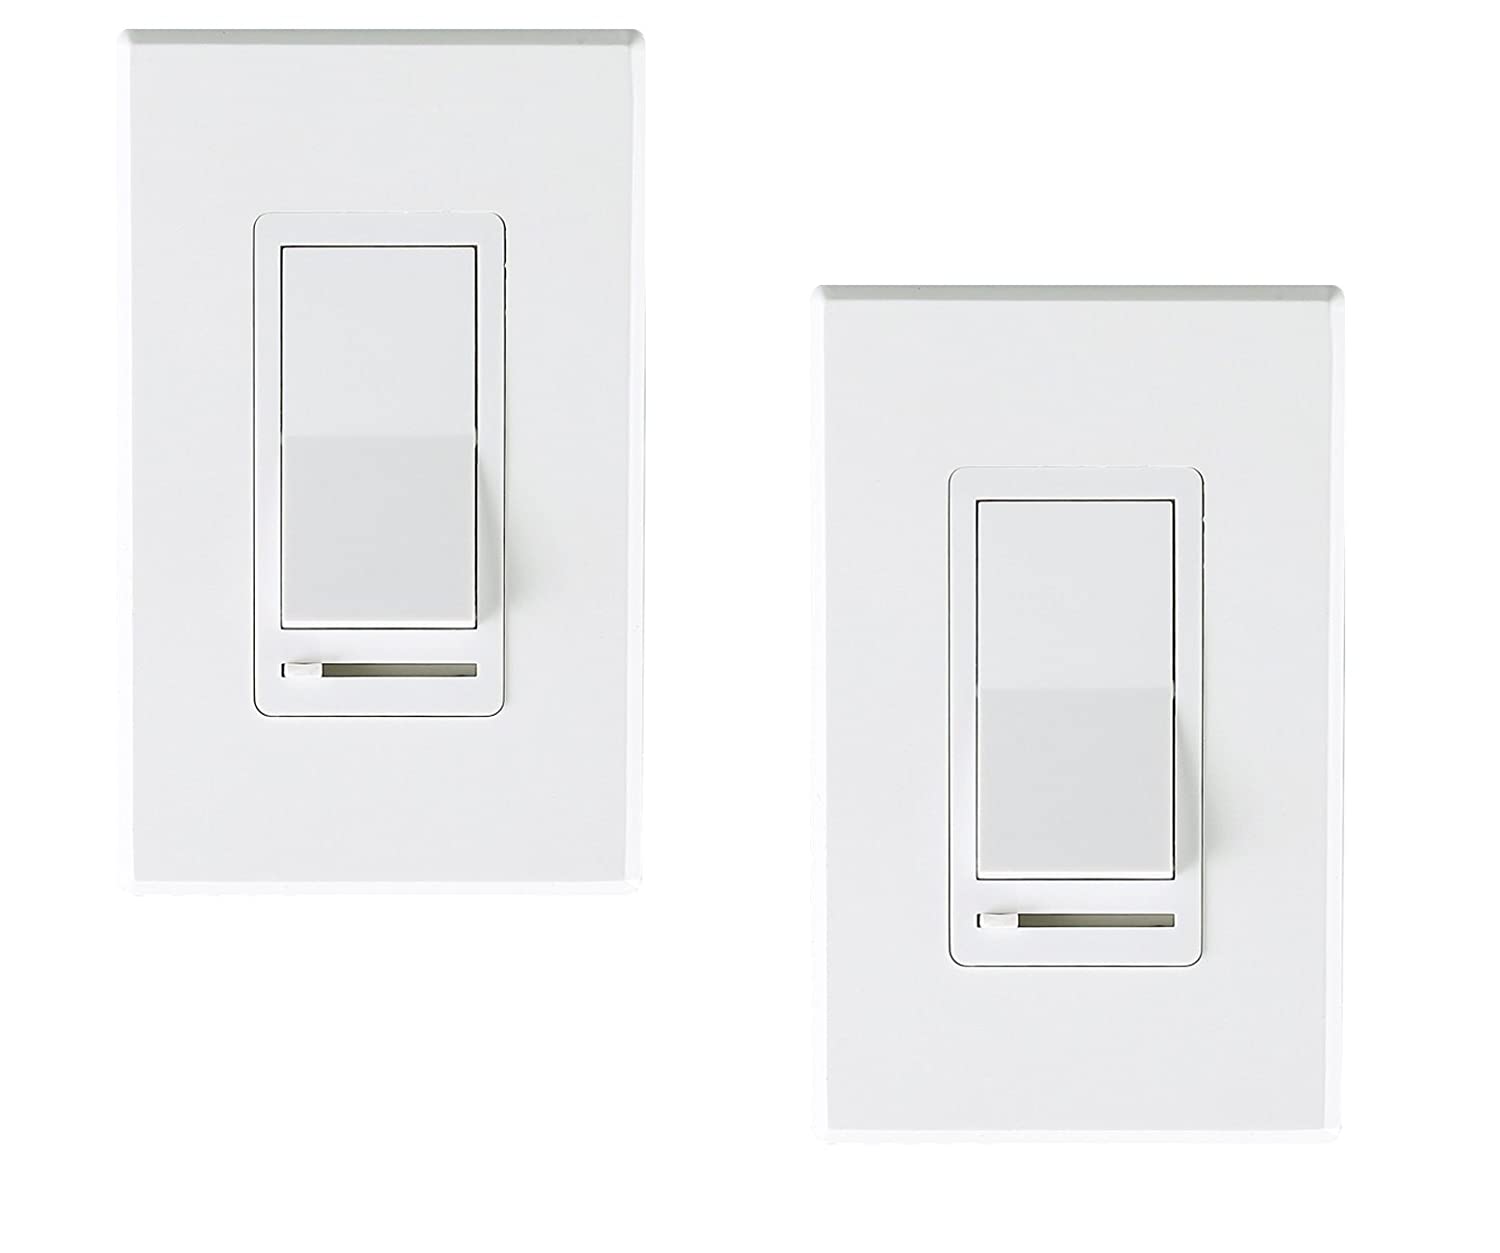 In Wall Dimmer Switch For LED Light/CFL/Incandescent, 3-way Single Pole, Cover Plate Included, White